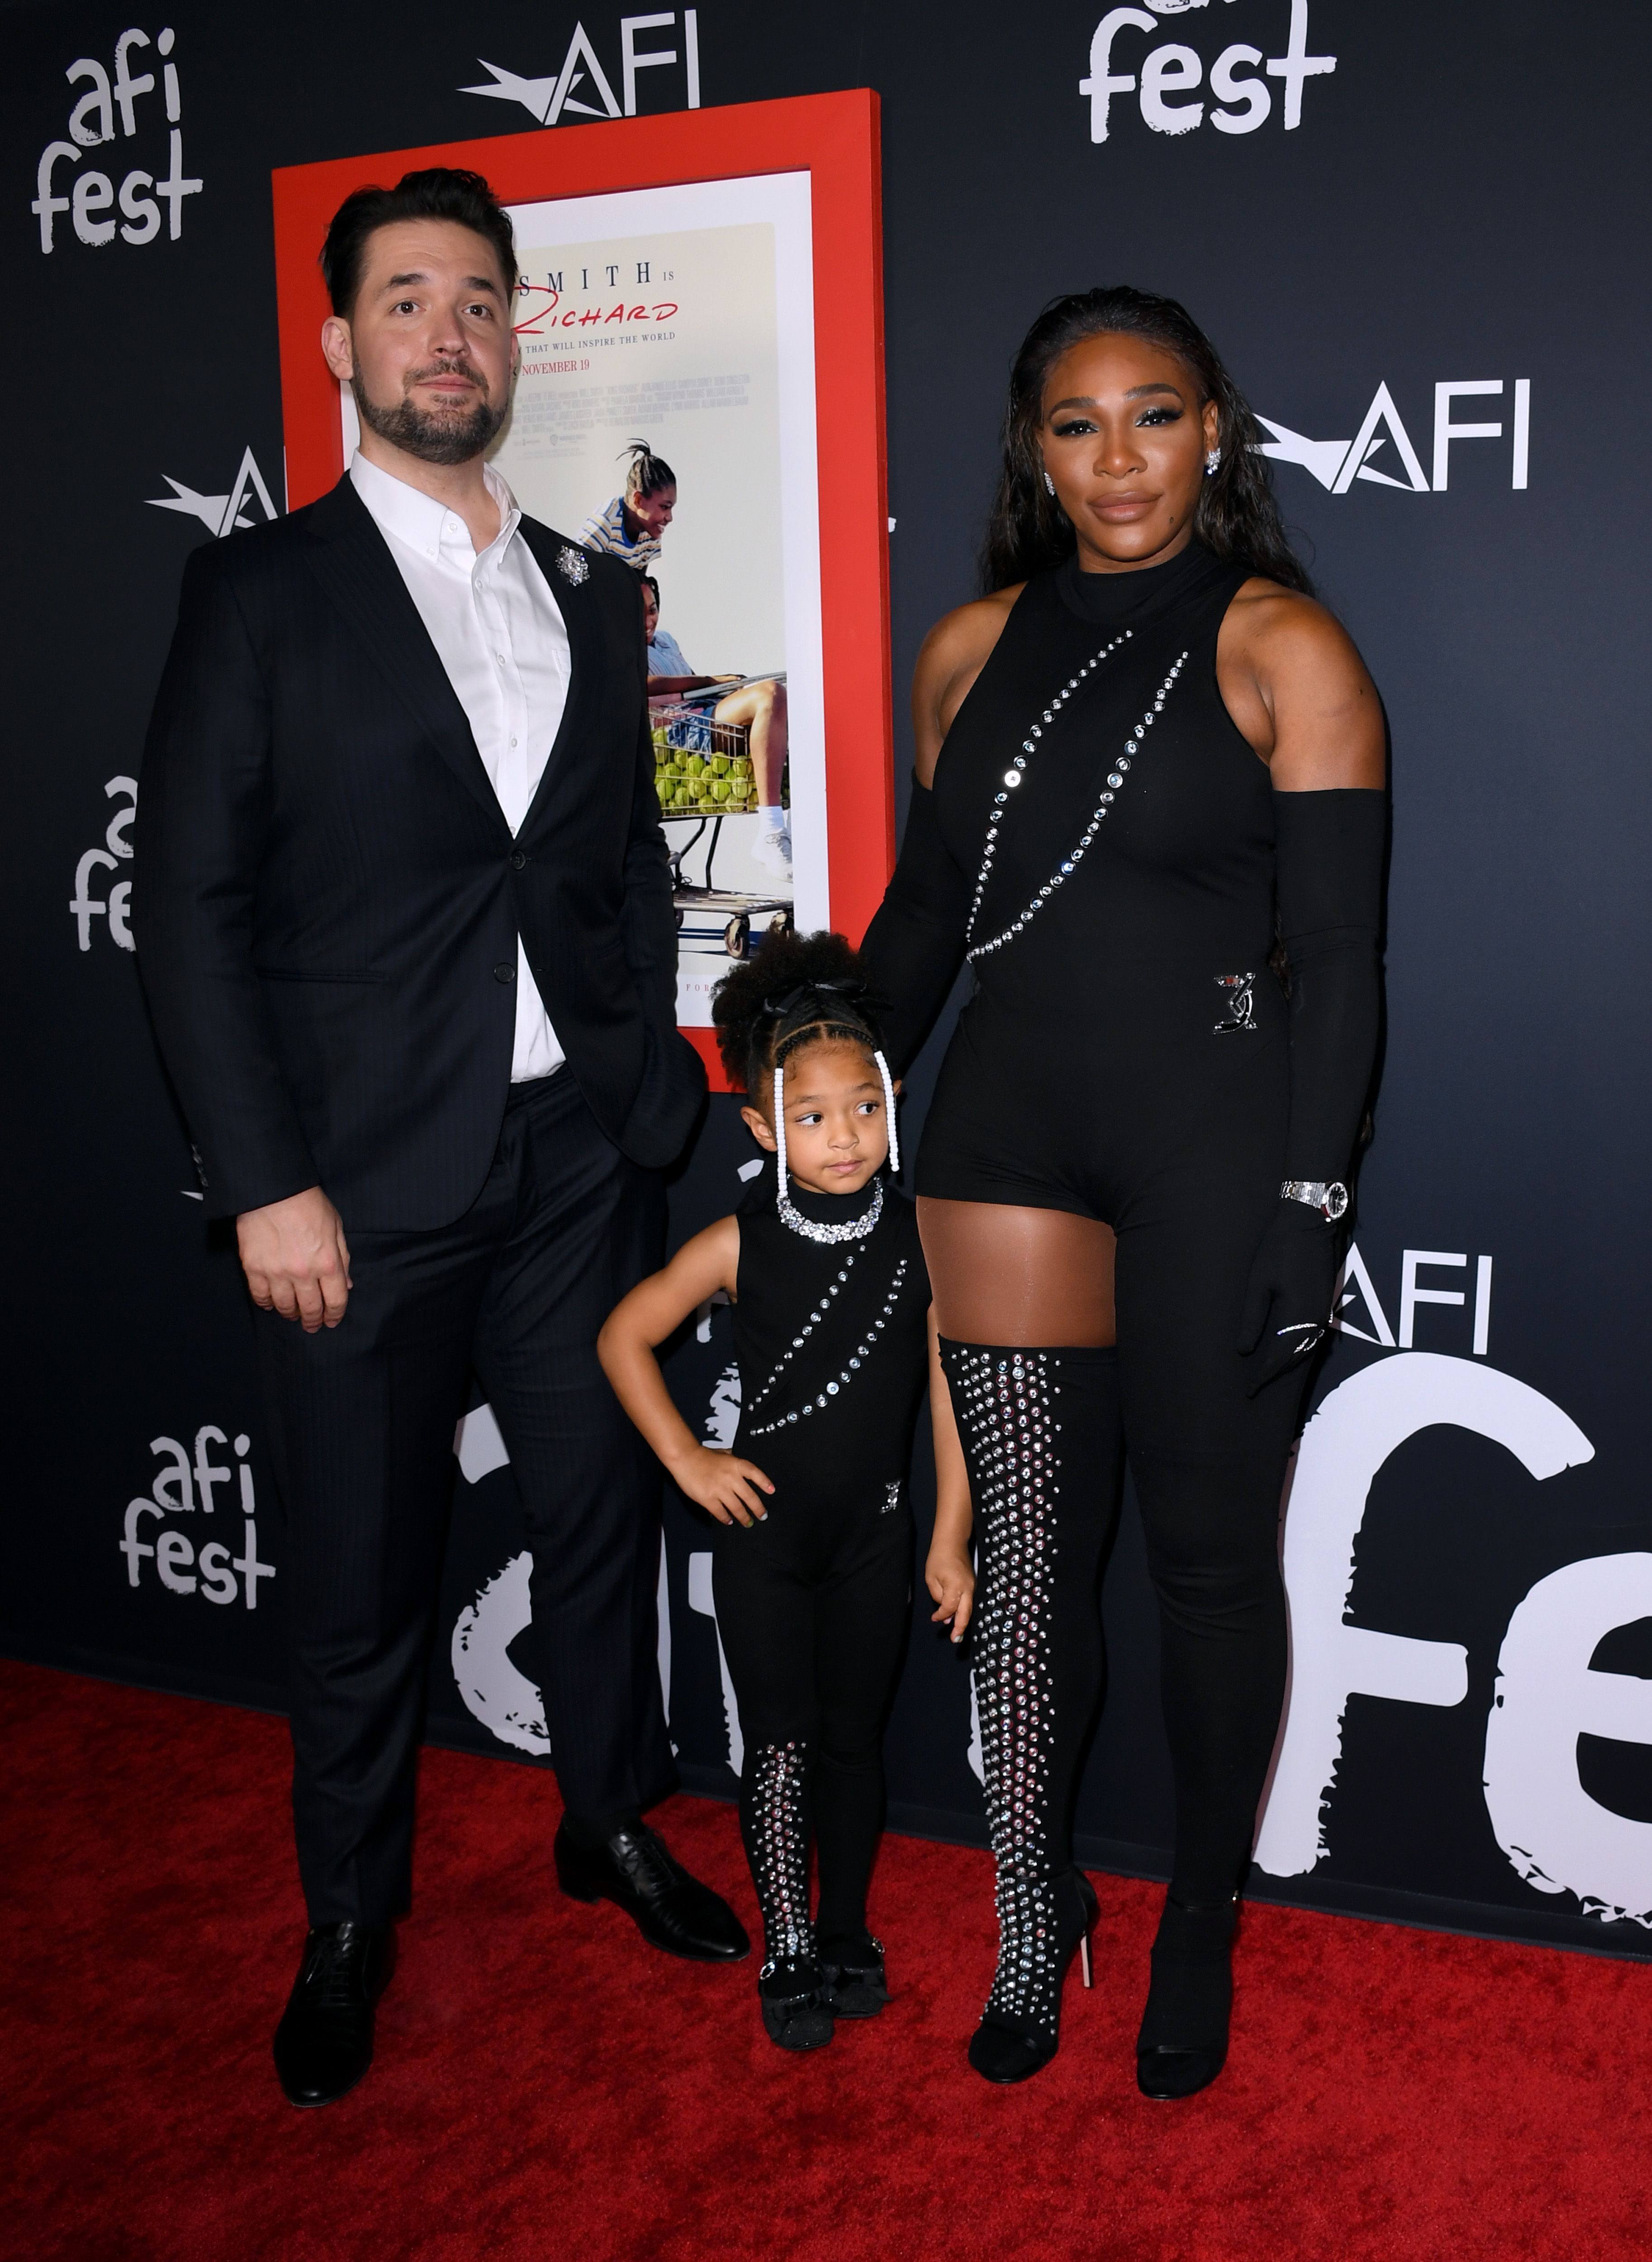 Alexis Ohanian Sr., Olympia Ohanian Jr., and Serena Williams at the AFI Fest closing night premiere of "King Richard" on November 14, 2021, in Hollywood, California. | Source: Jon Kopaloff/Getty Images